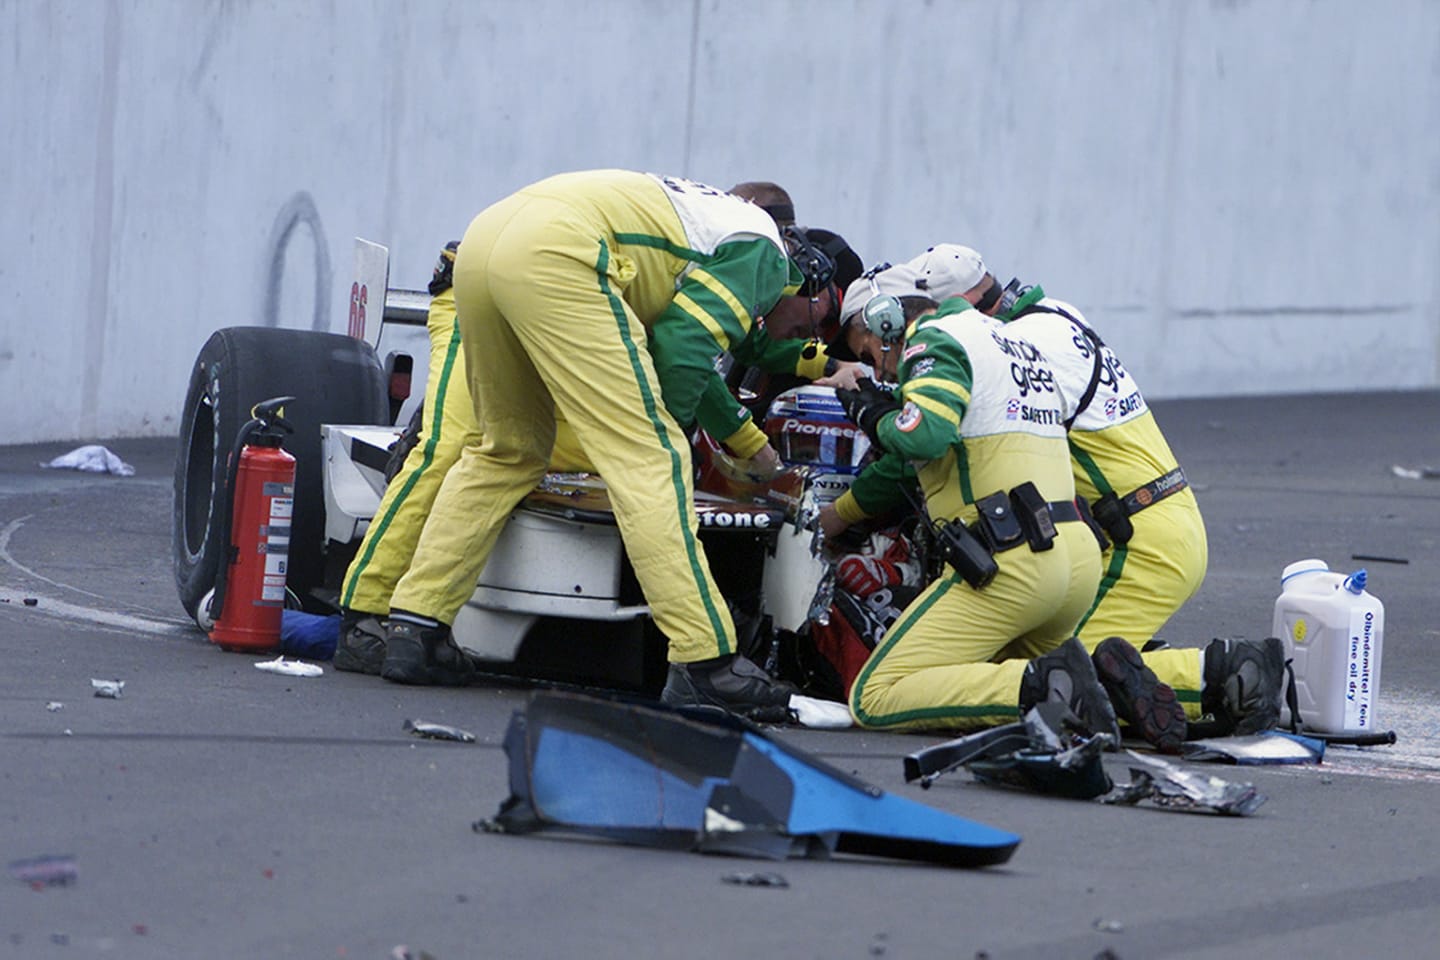 Zanardi was lucky to survive a brutal Champ Car crash in 2001, after which his legs were amputated. (Photo by: Jonathan Ferrey/Getty Images) 